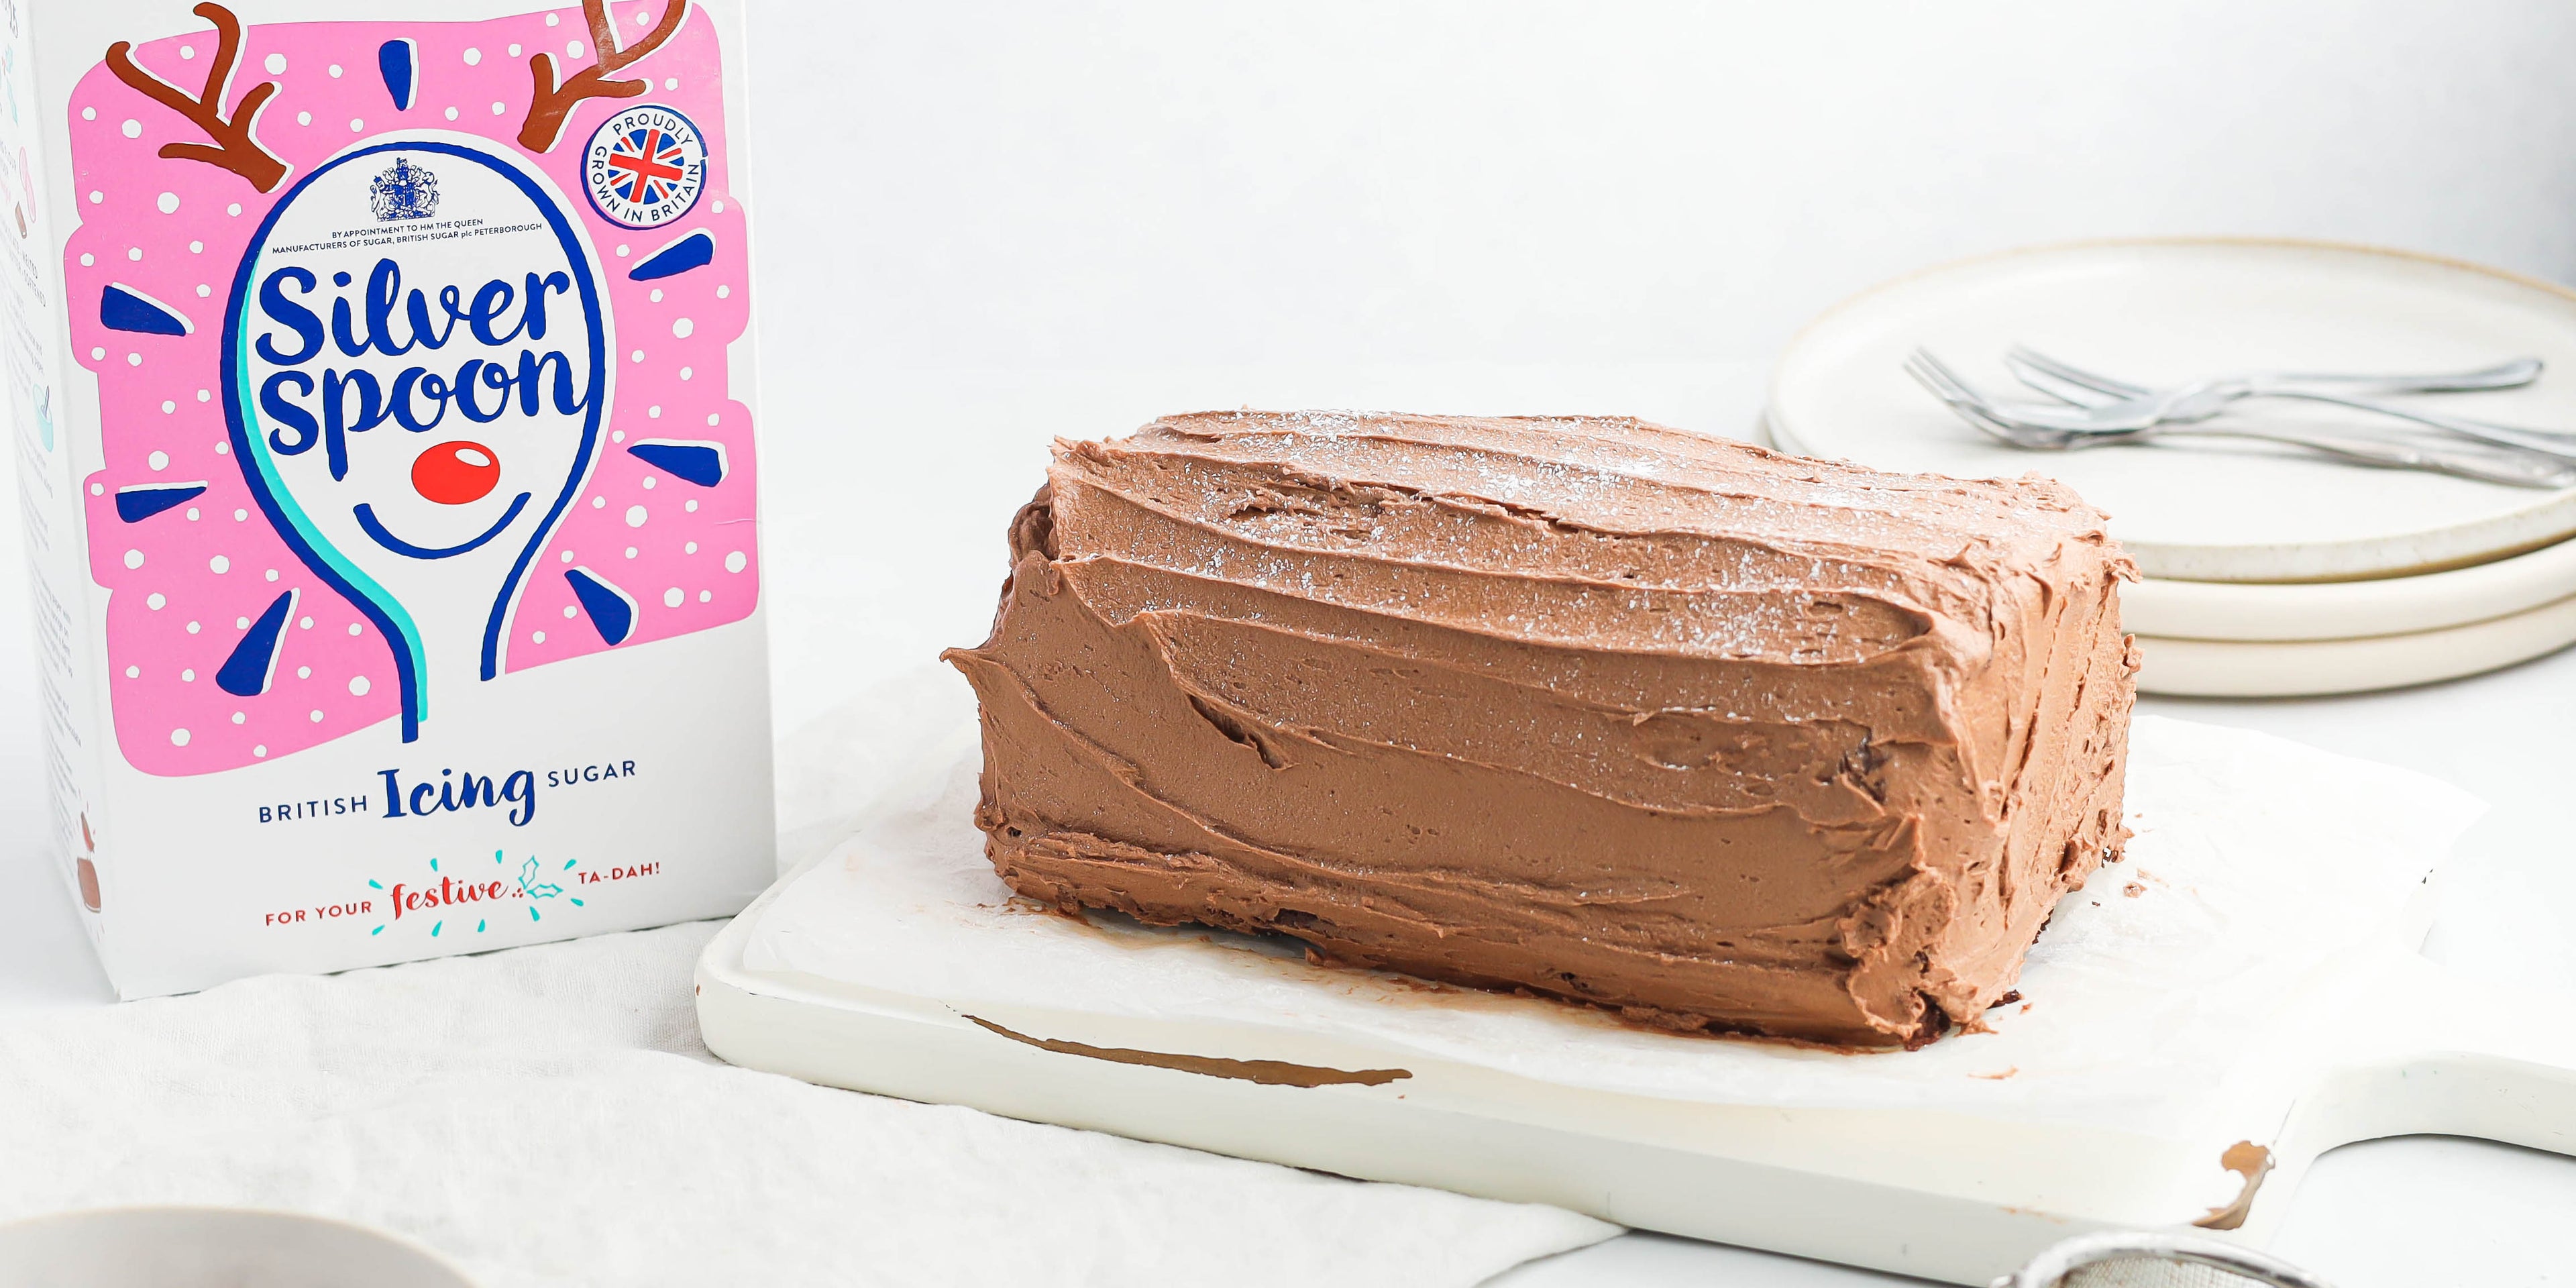 Chocolate Yule Log covered in rich chocolate icing next to a box of Silver Spoon icing sugar